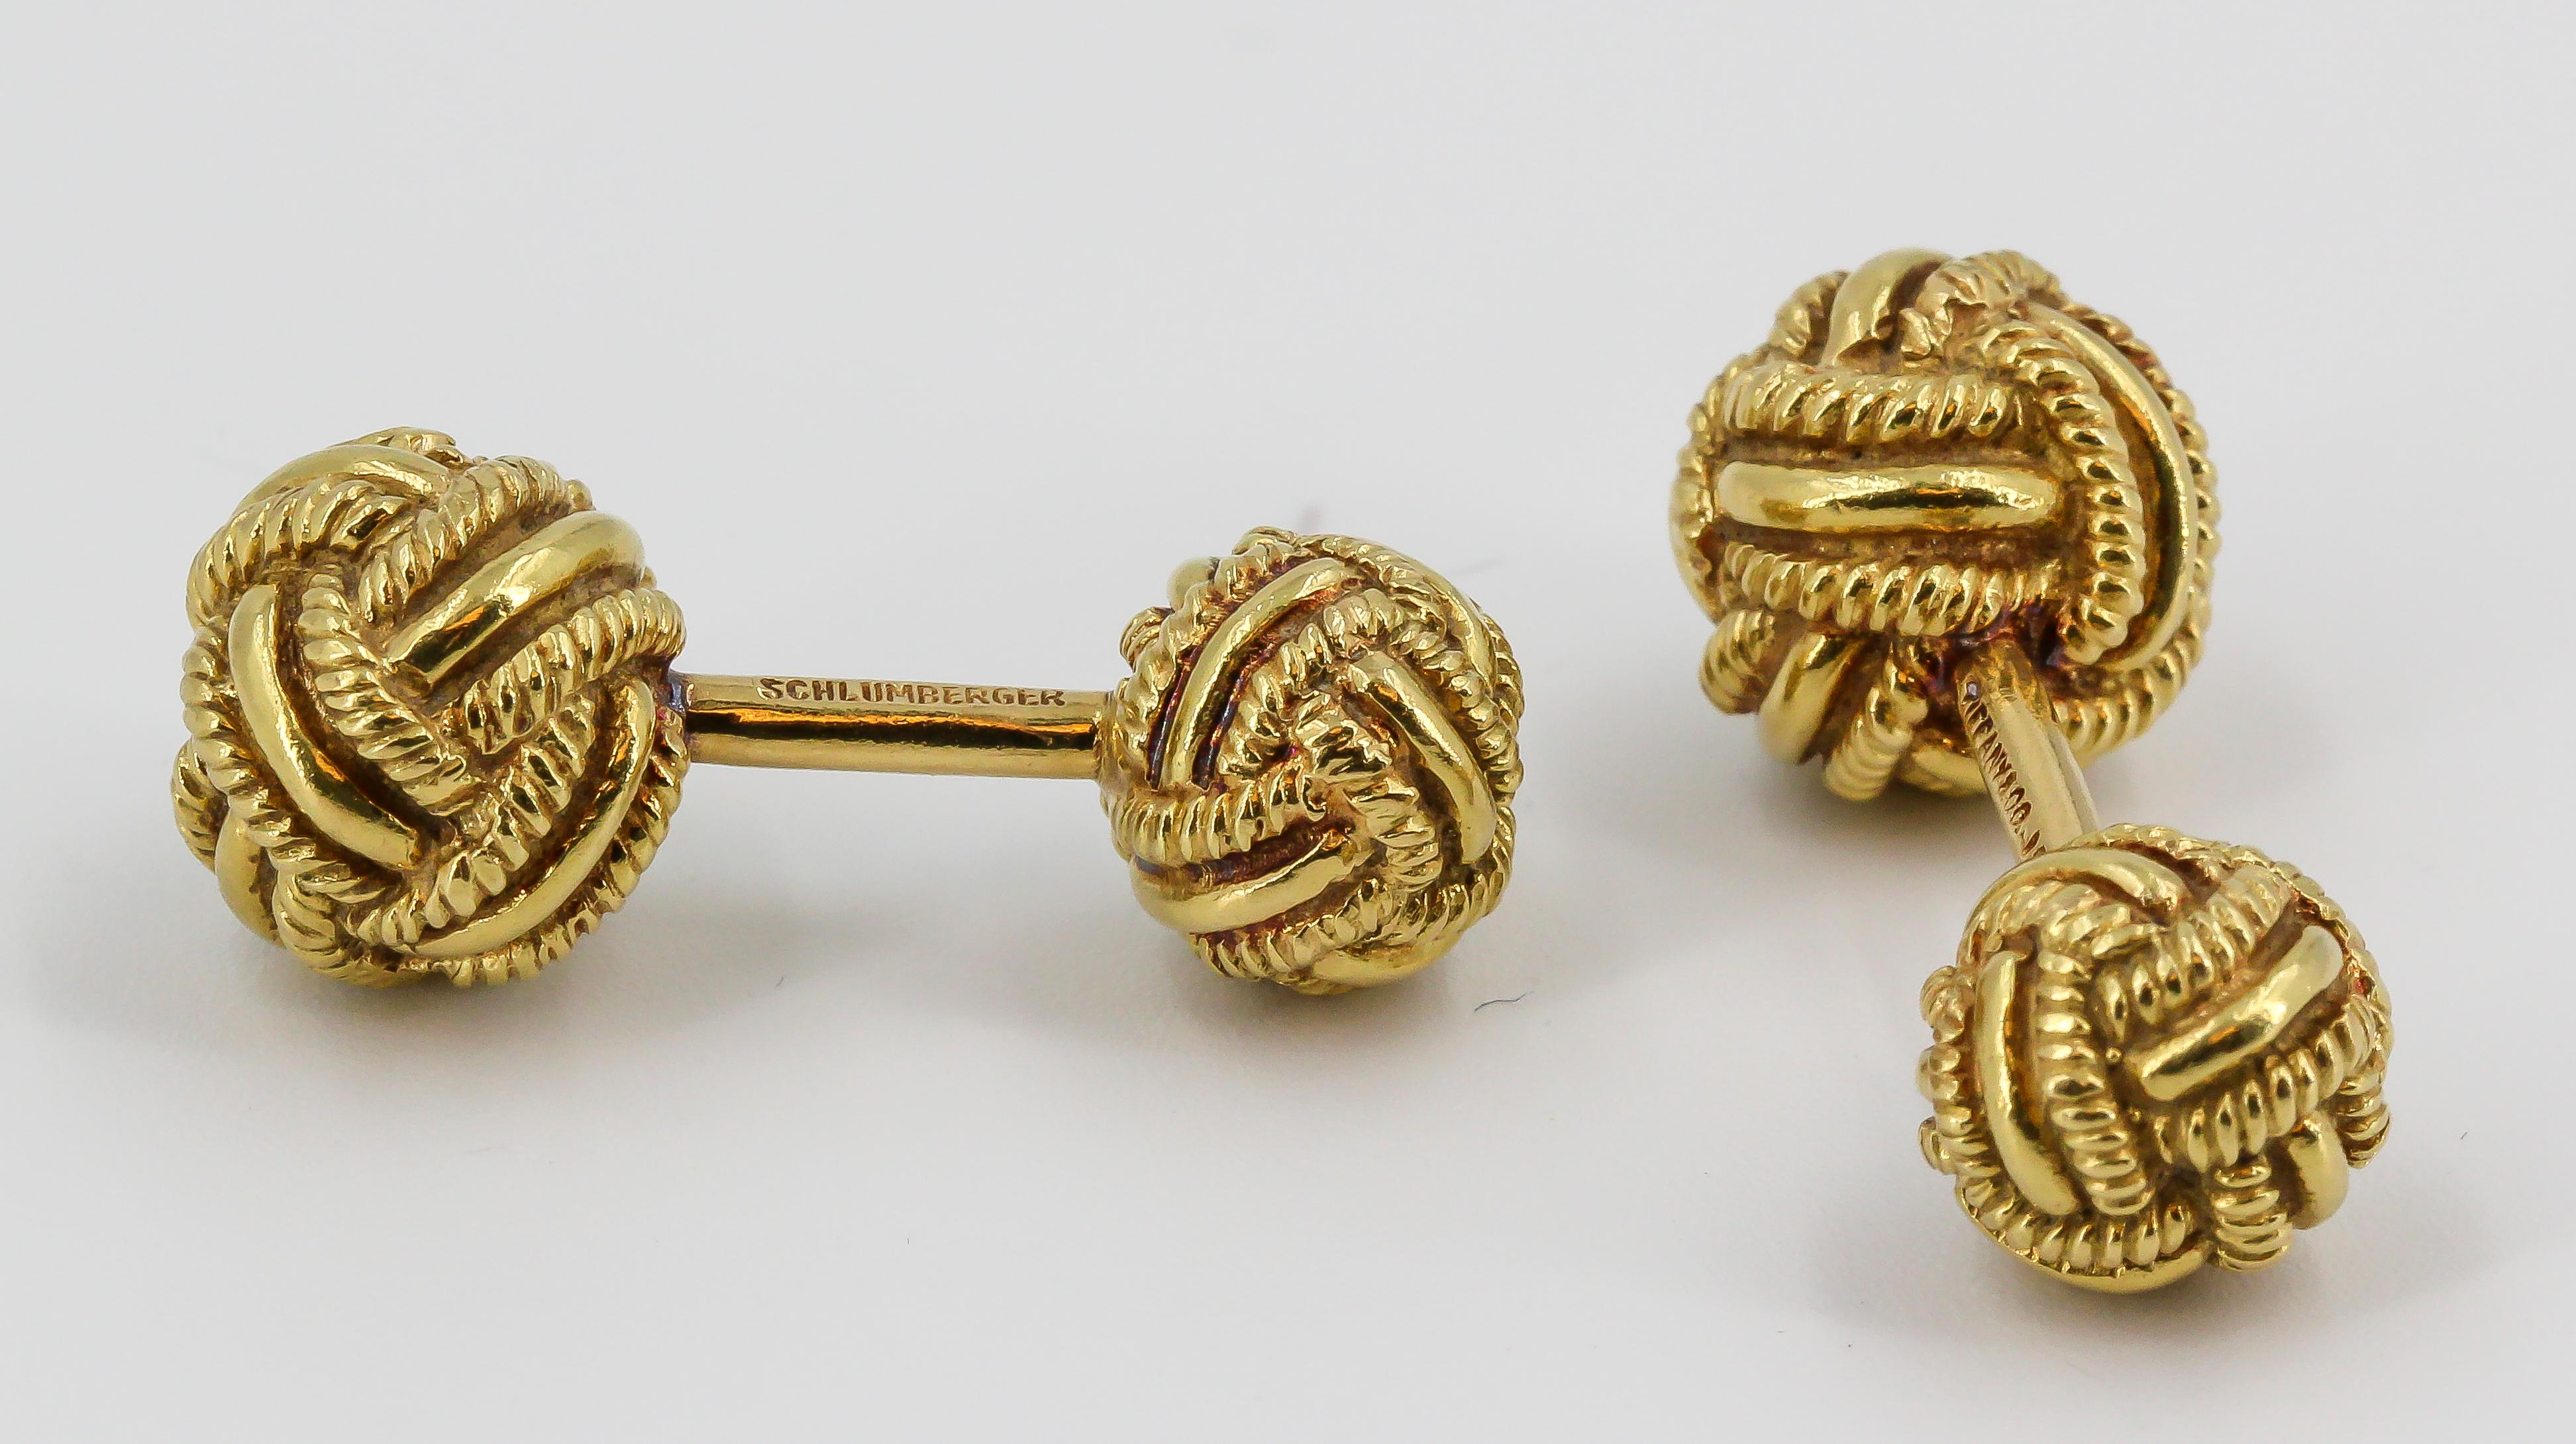 Timeless 18K yellow gold dumbbell cufflinks by Tiffany & Co., Schlumberger, circa 1970s. They feature a twisted rope knot design.

Hallmarks: Tiffany & CO., Schlumberger, 18k